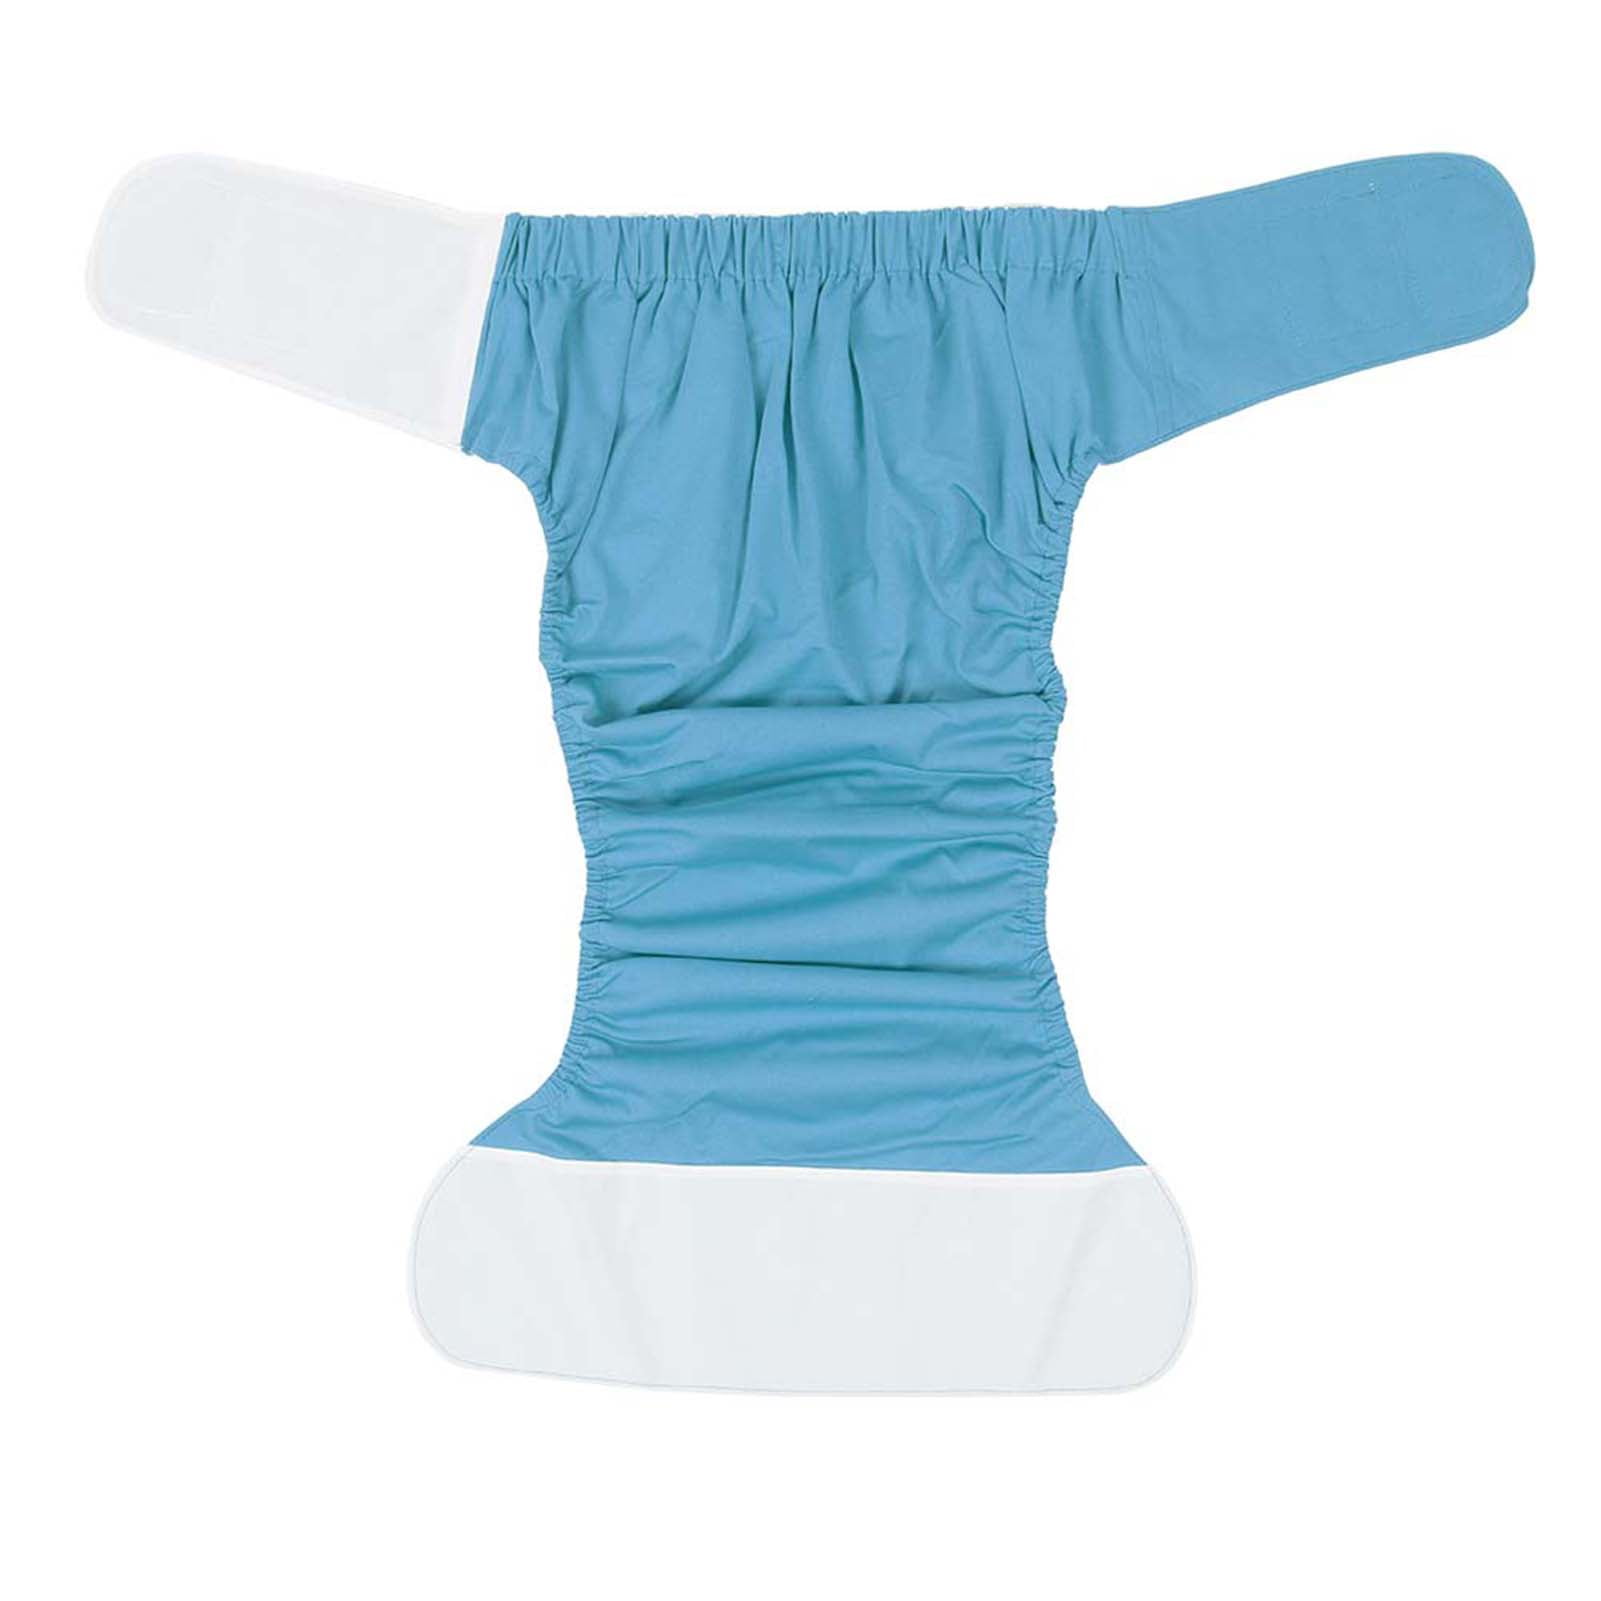 LYUMO Adult Elderly Cloth Diapers Nappies Washable Incontinence Aid Underwear Pants